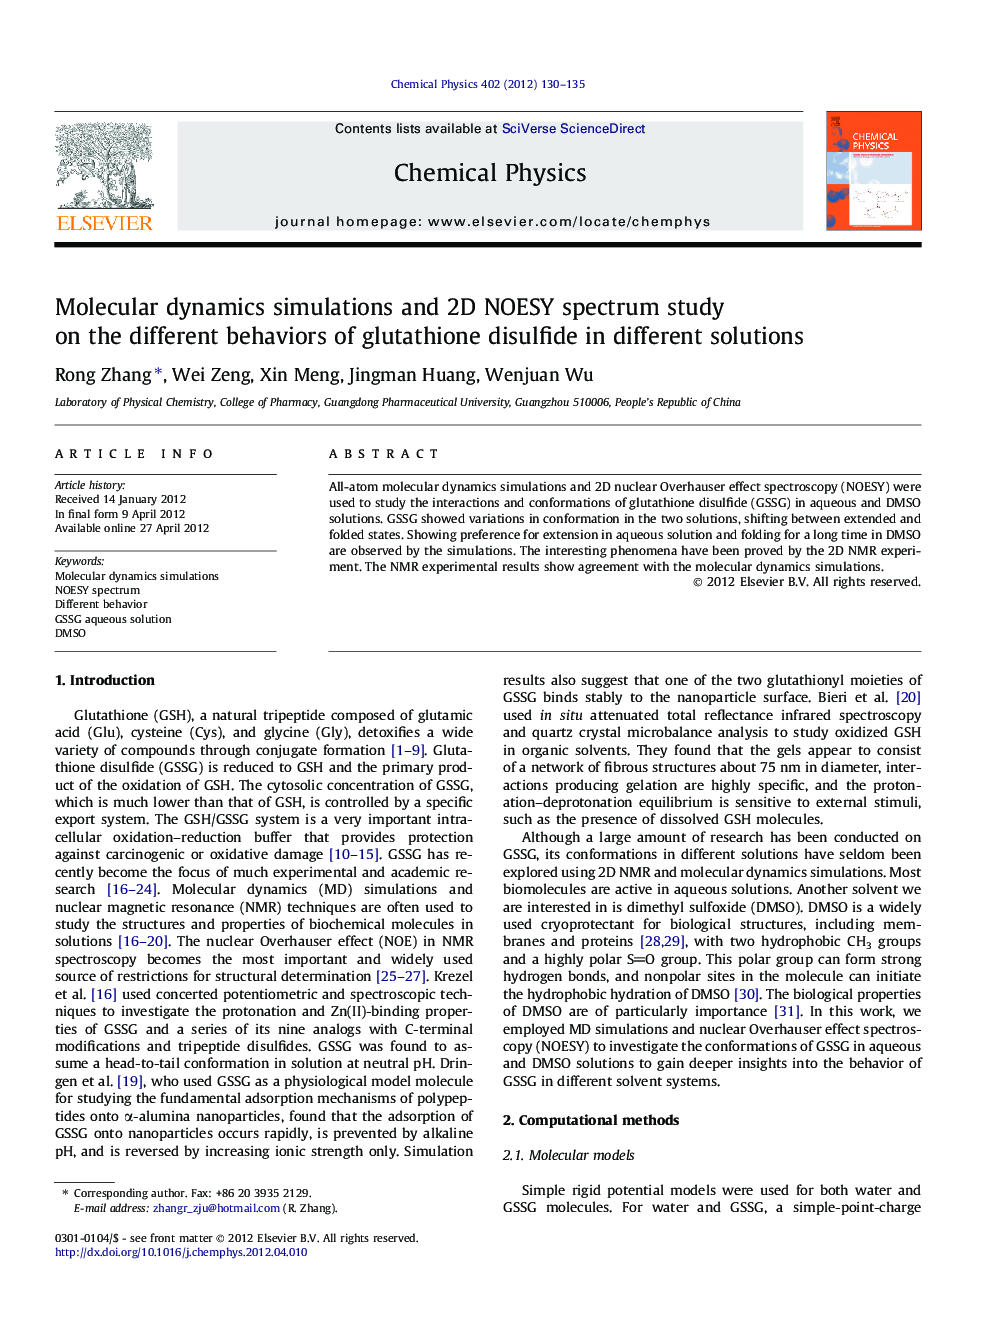 Molecular dynamics simulations and 2D NOESY spectrum study on the different behaviors of glutathione disulfide in different solutions